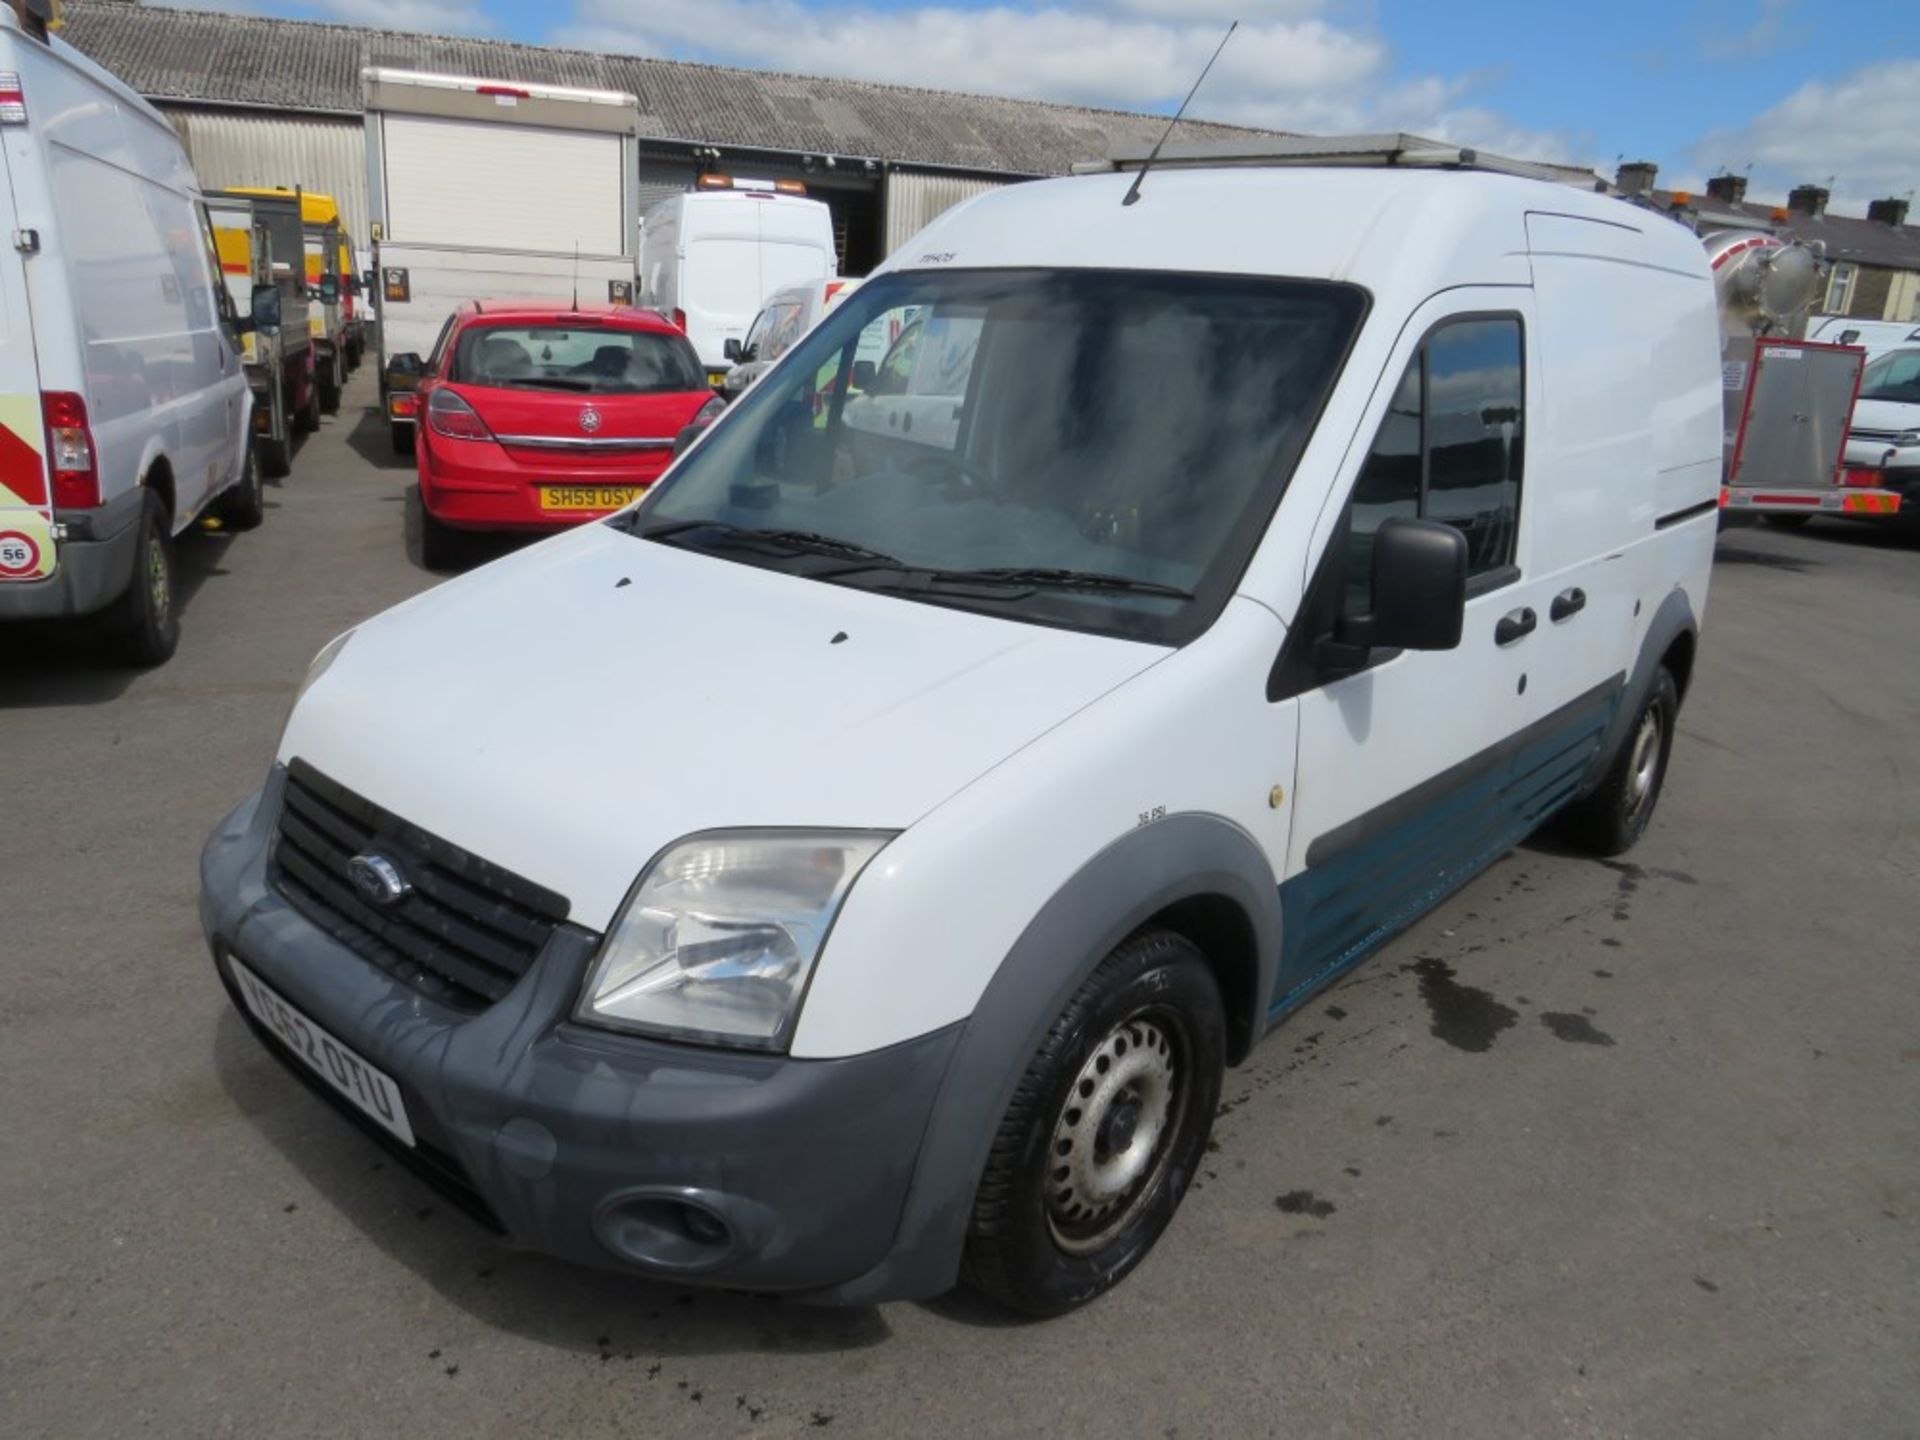 62 reg FORD TRANSIT CONNECT (DIRECT UNITED UTILITIES WATER) 1ST REG 10/12, TEST 08/21, [+ VAT] - Image 2 of 7